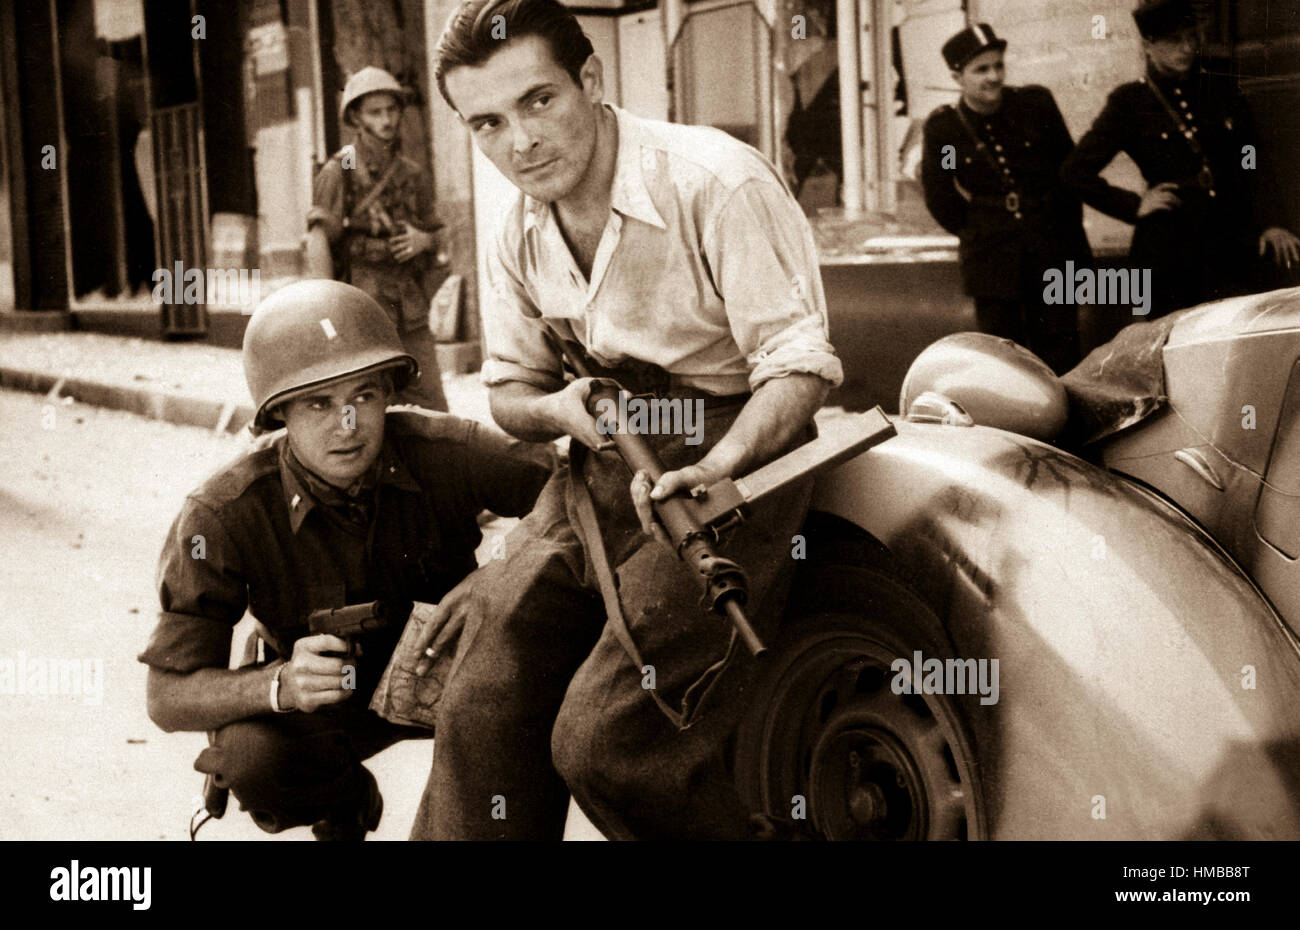 American officer and French partisan crouch behind an auto during a street fight in a French city, ca.  1944. (Army) Exact Date Shot Unknown NARA FILE #:  111-SC-217401 WAR & CONFLICT BOOK #:  1055 Stock Photo